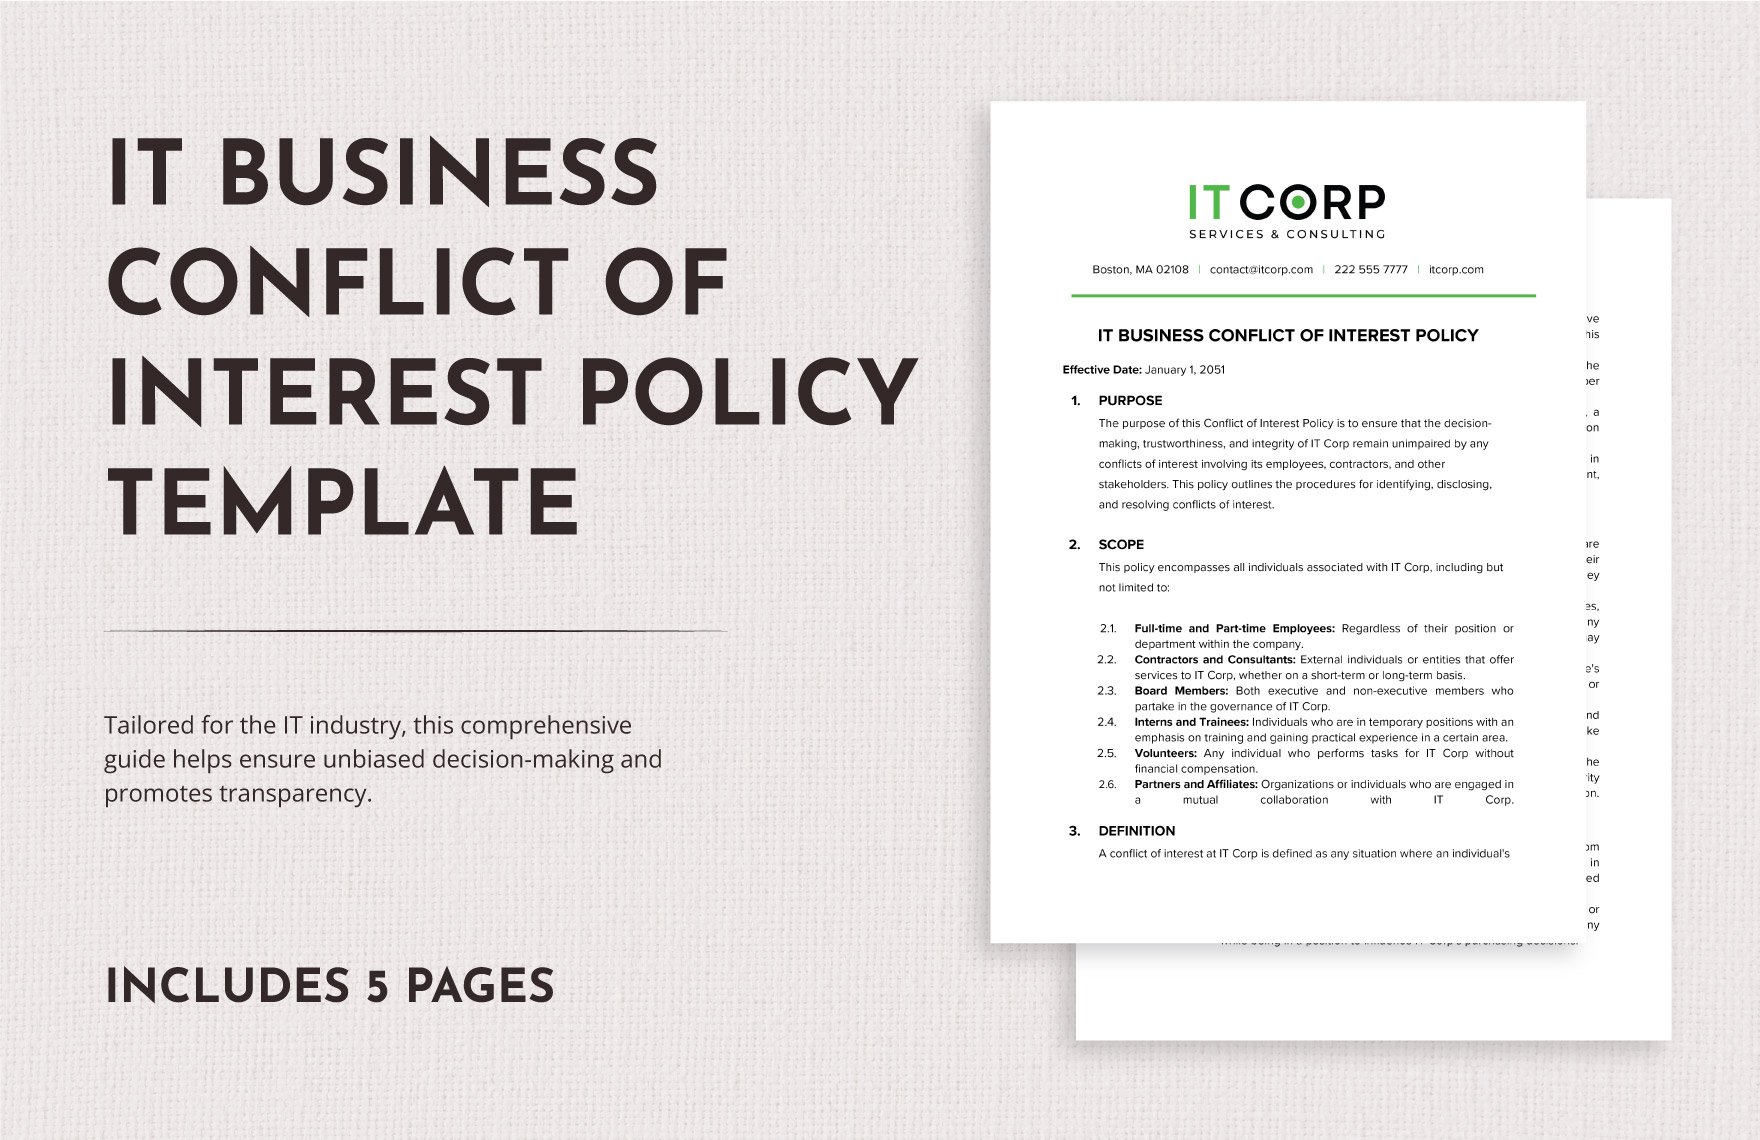 IT Business Conflict of Interest Policy Template